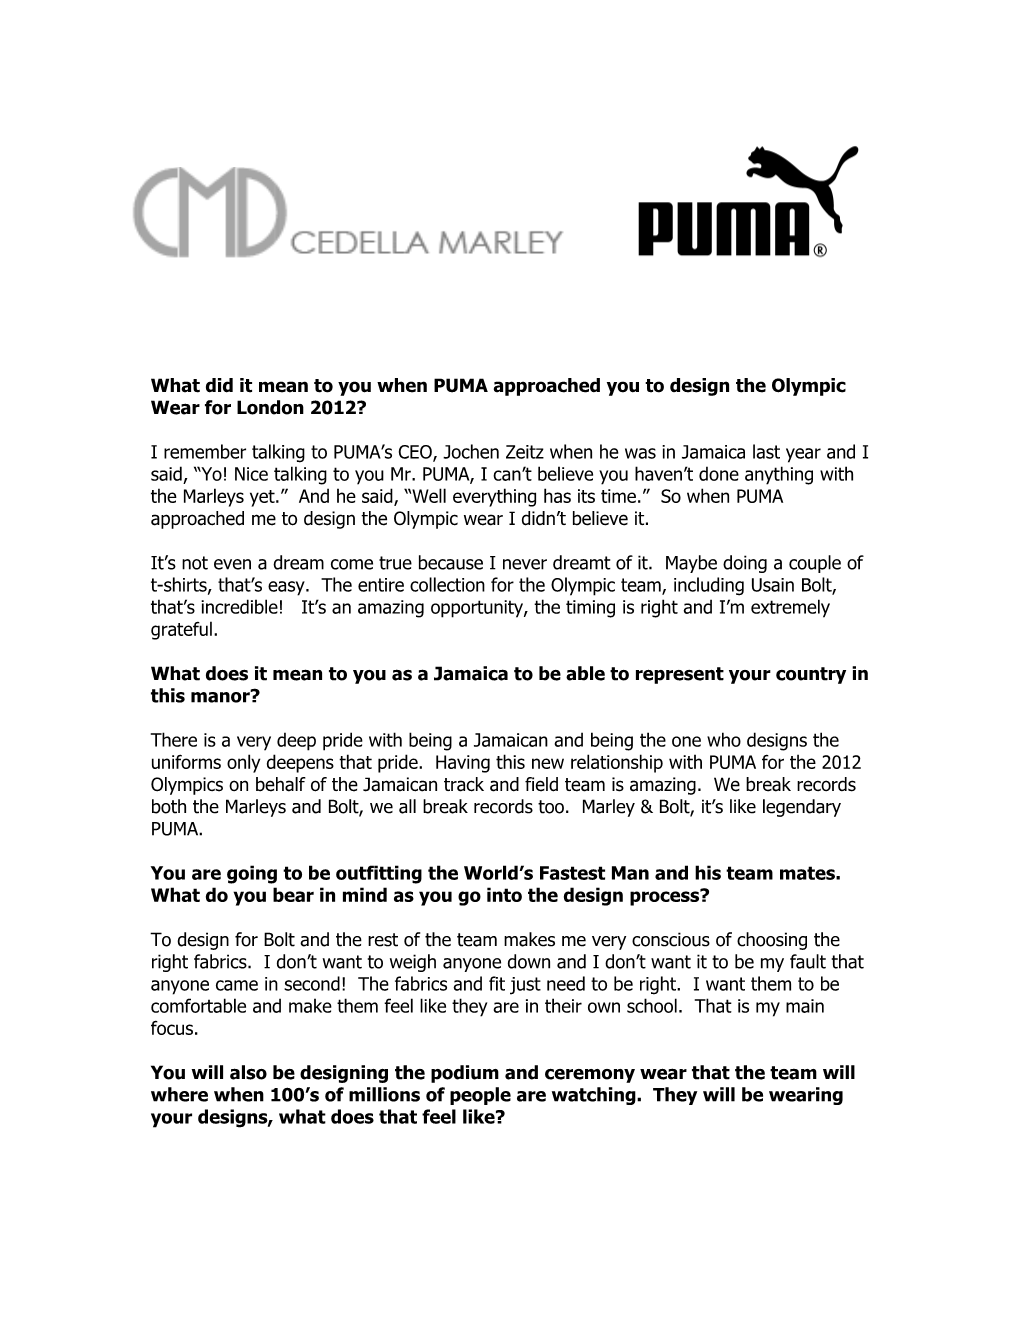 What Did It Mean to You When PUMA Approached You to Design the Olympic Wear for London 2012